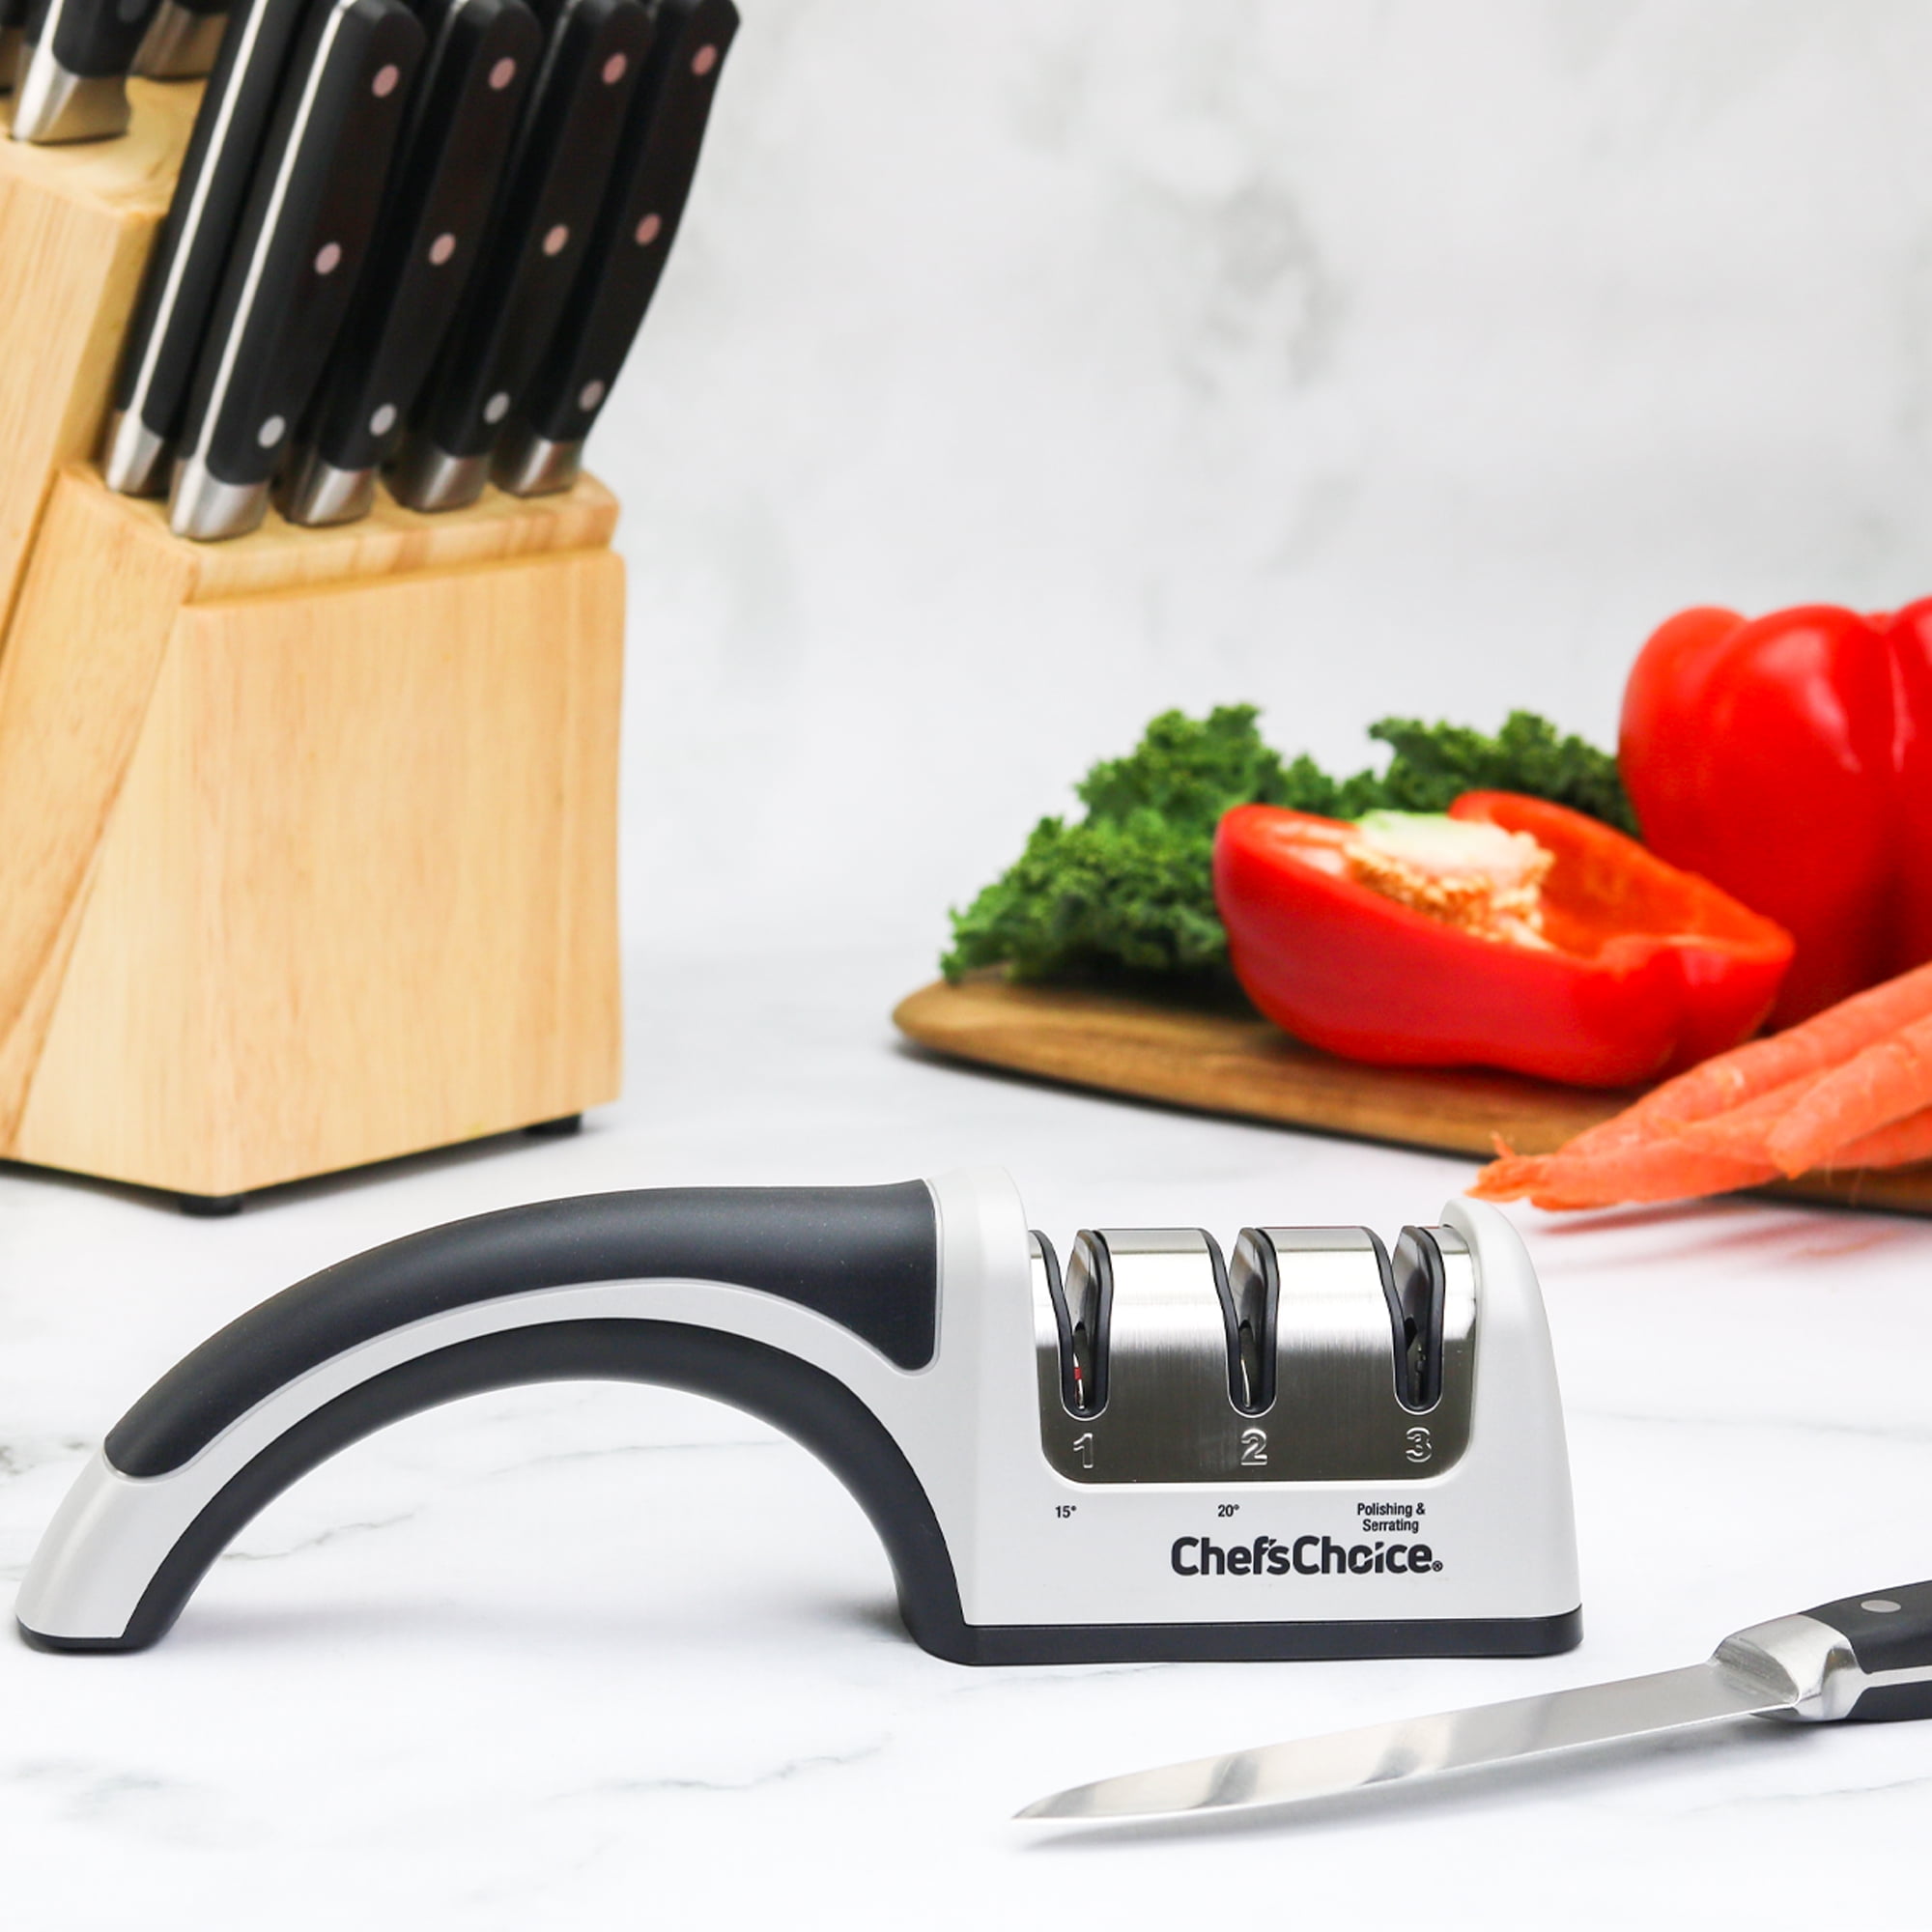 Review: Chef's Choice 4643 Manual Knife Sharpener